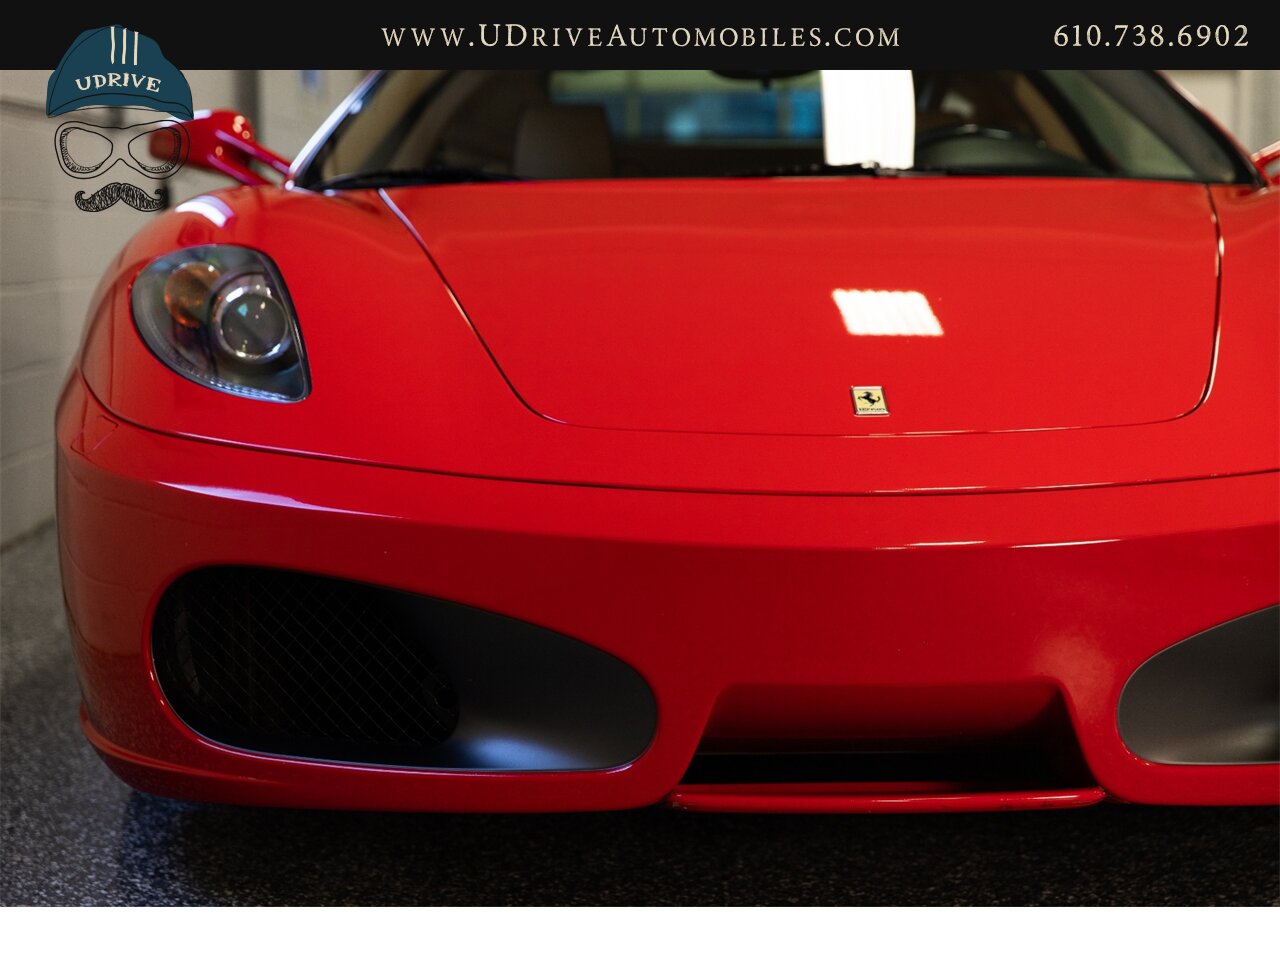 2006 Ferrari F430 F1 Coupe 1 Owner Daytona Seats Challenge Whls  Carbon Fibre Upper Lower Zone Shields Piping Serv Hist $208k MSRP - Photo 11 - West Chester, PA 19382